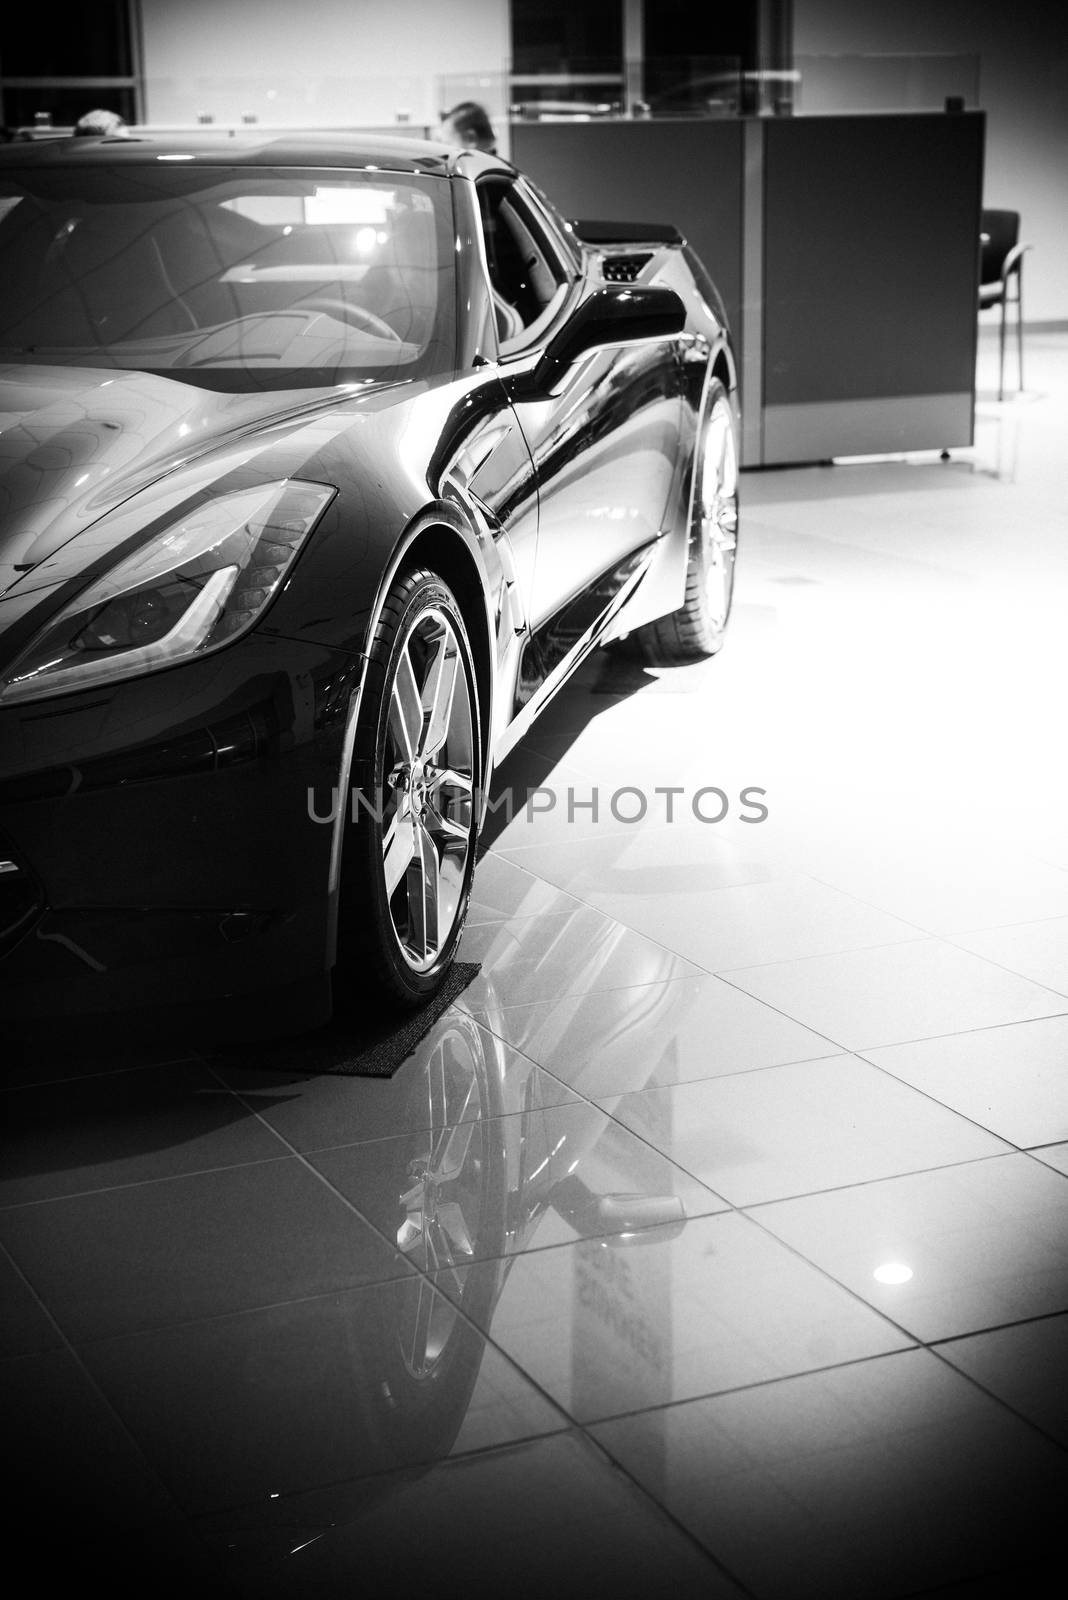 Luxury Super Car For Sale in Dealership Showroom. Black and White Color Grading.